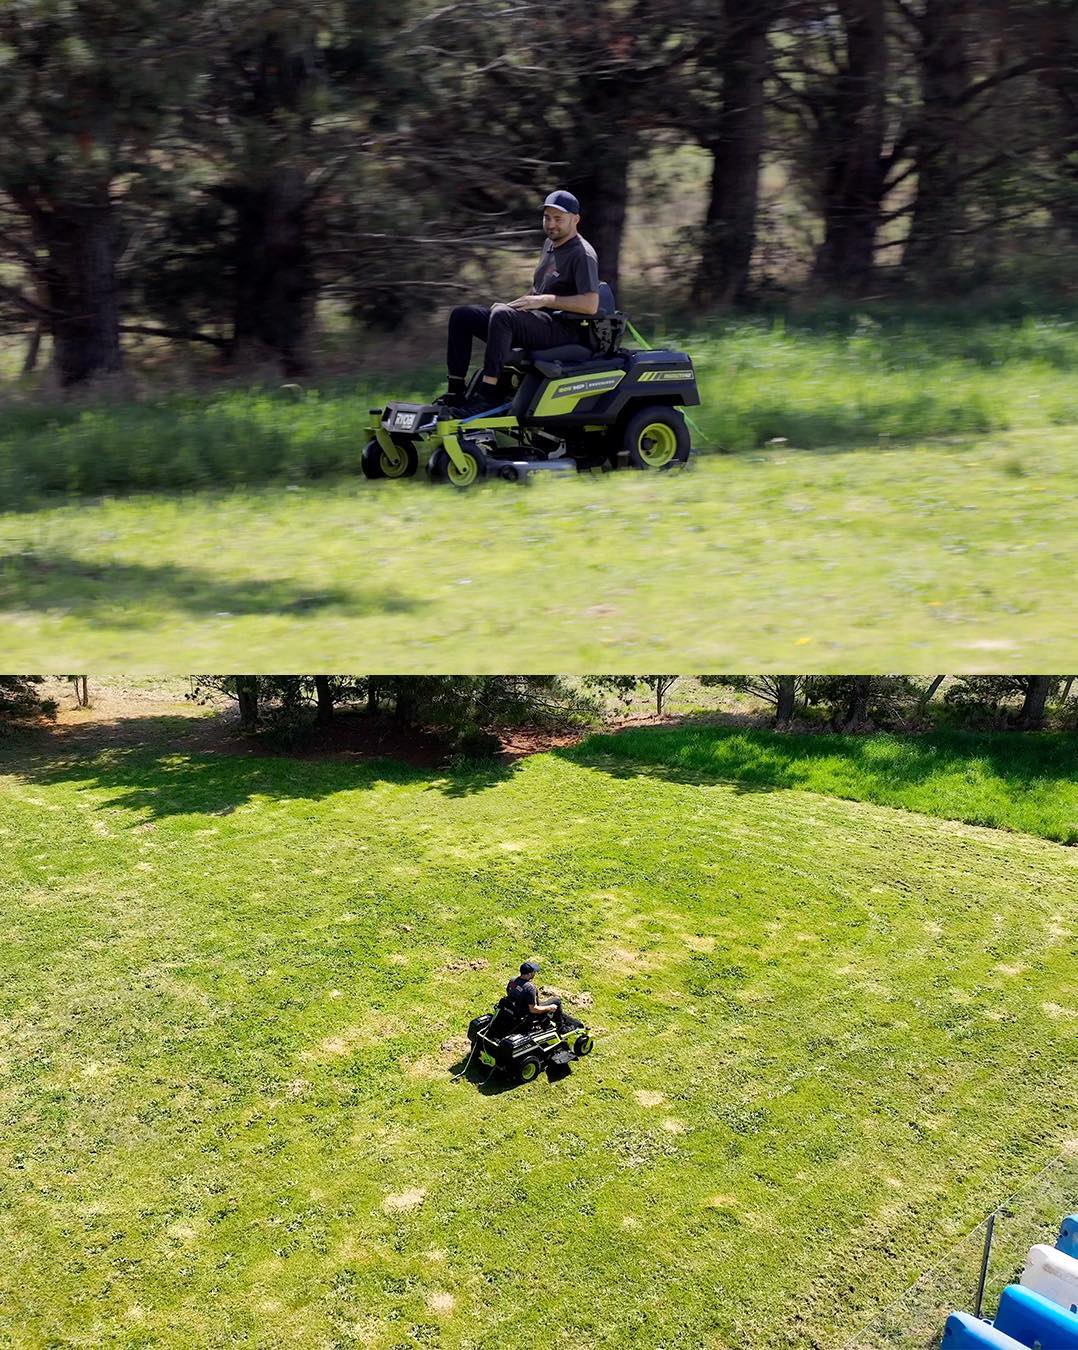 @mightycarmods puts the RYOBI 42' Lithium Zero Turn Ride-On mower to the test, tackling a large grassed area with ease.

Tag someone in the comments below who needs a RYOBI ride-on mower for their lawn! 

#RYOBIau #batterypowered #RYOBImade #RYOBIpowertools #rideonmower #lawncare